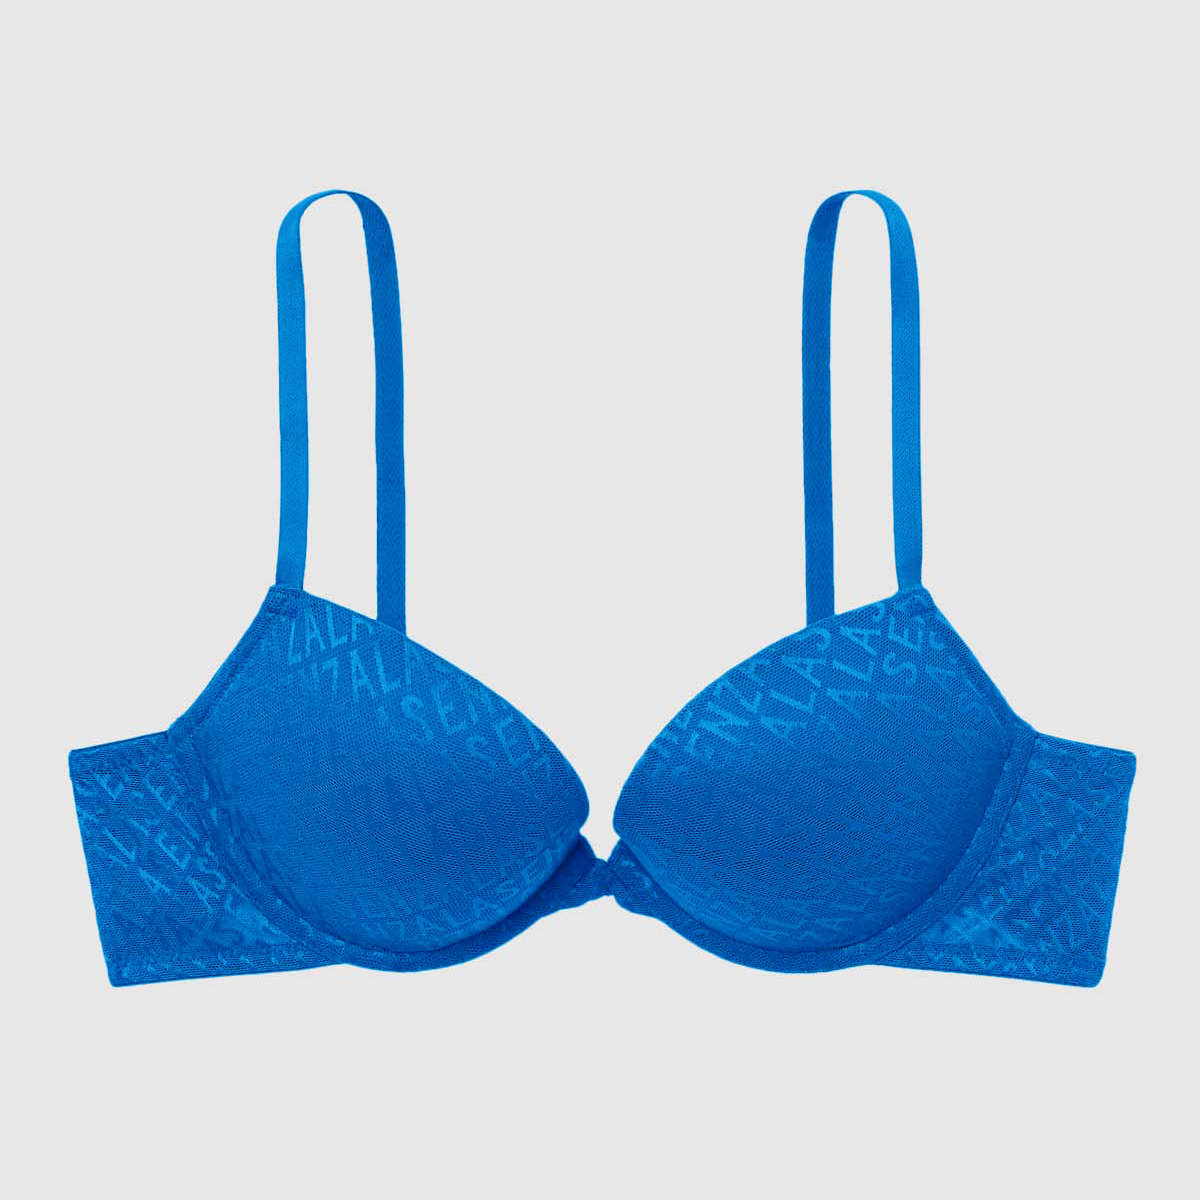 Close-up of Lace Push-up Bras - Various Colored Brassieres Stock Image -  Image of color, push: 119577387